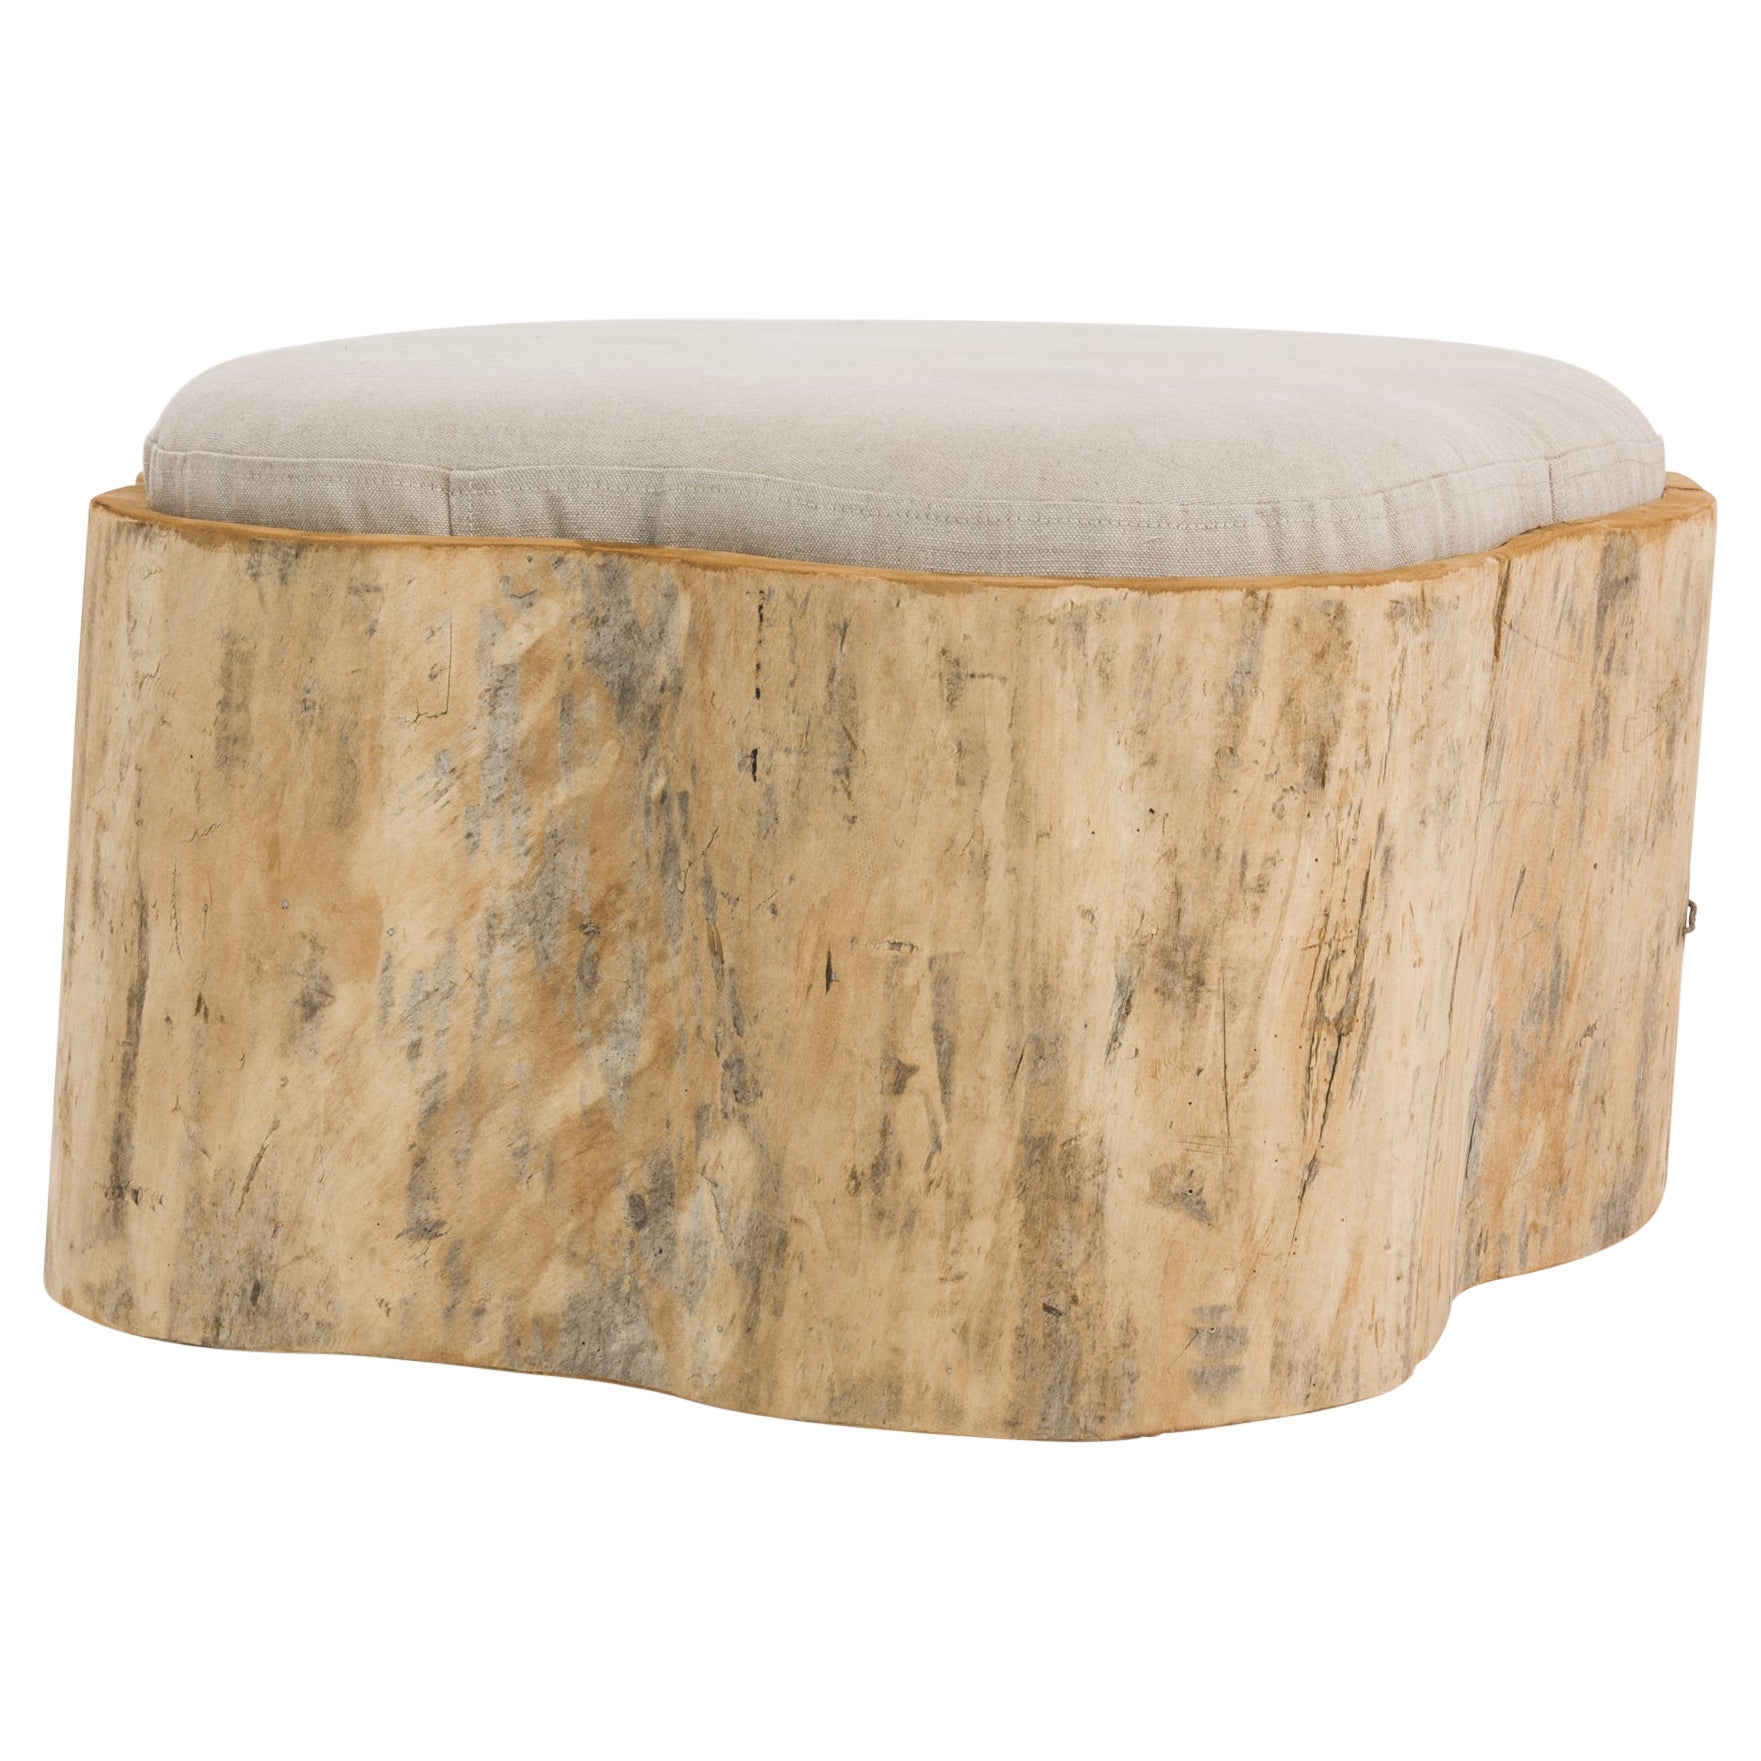 1800s Central European Tree-Stump Pouf with Upholstered Seat